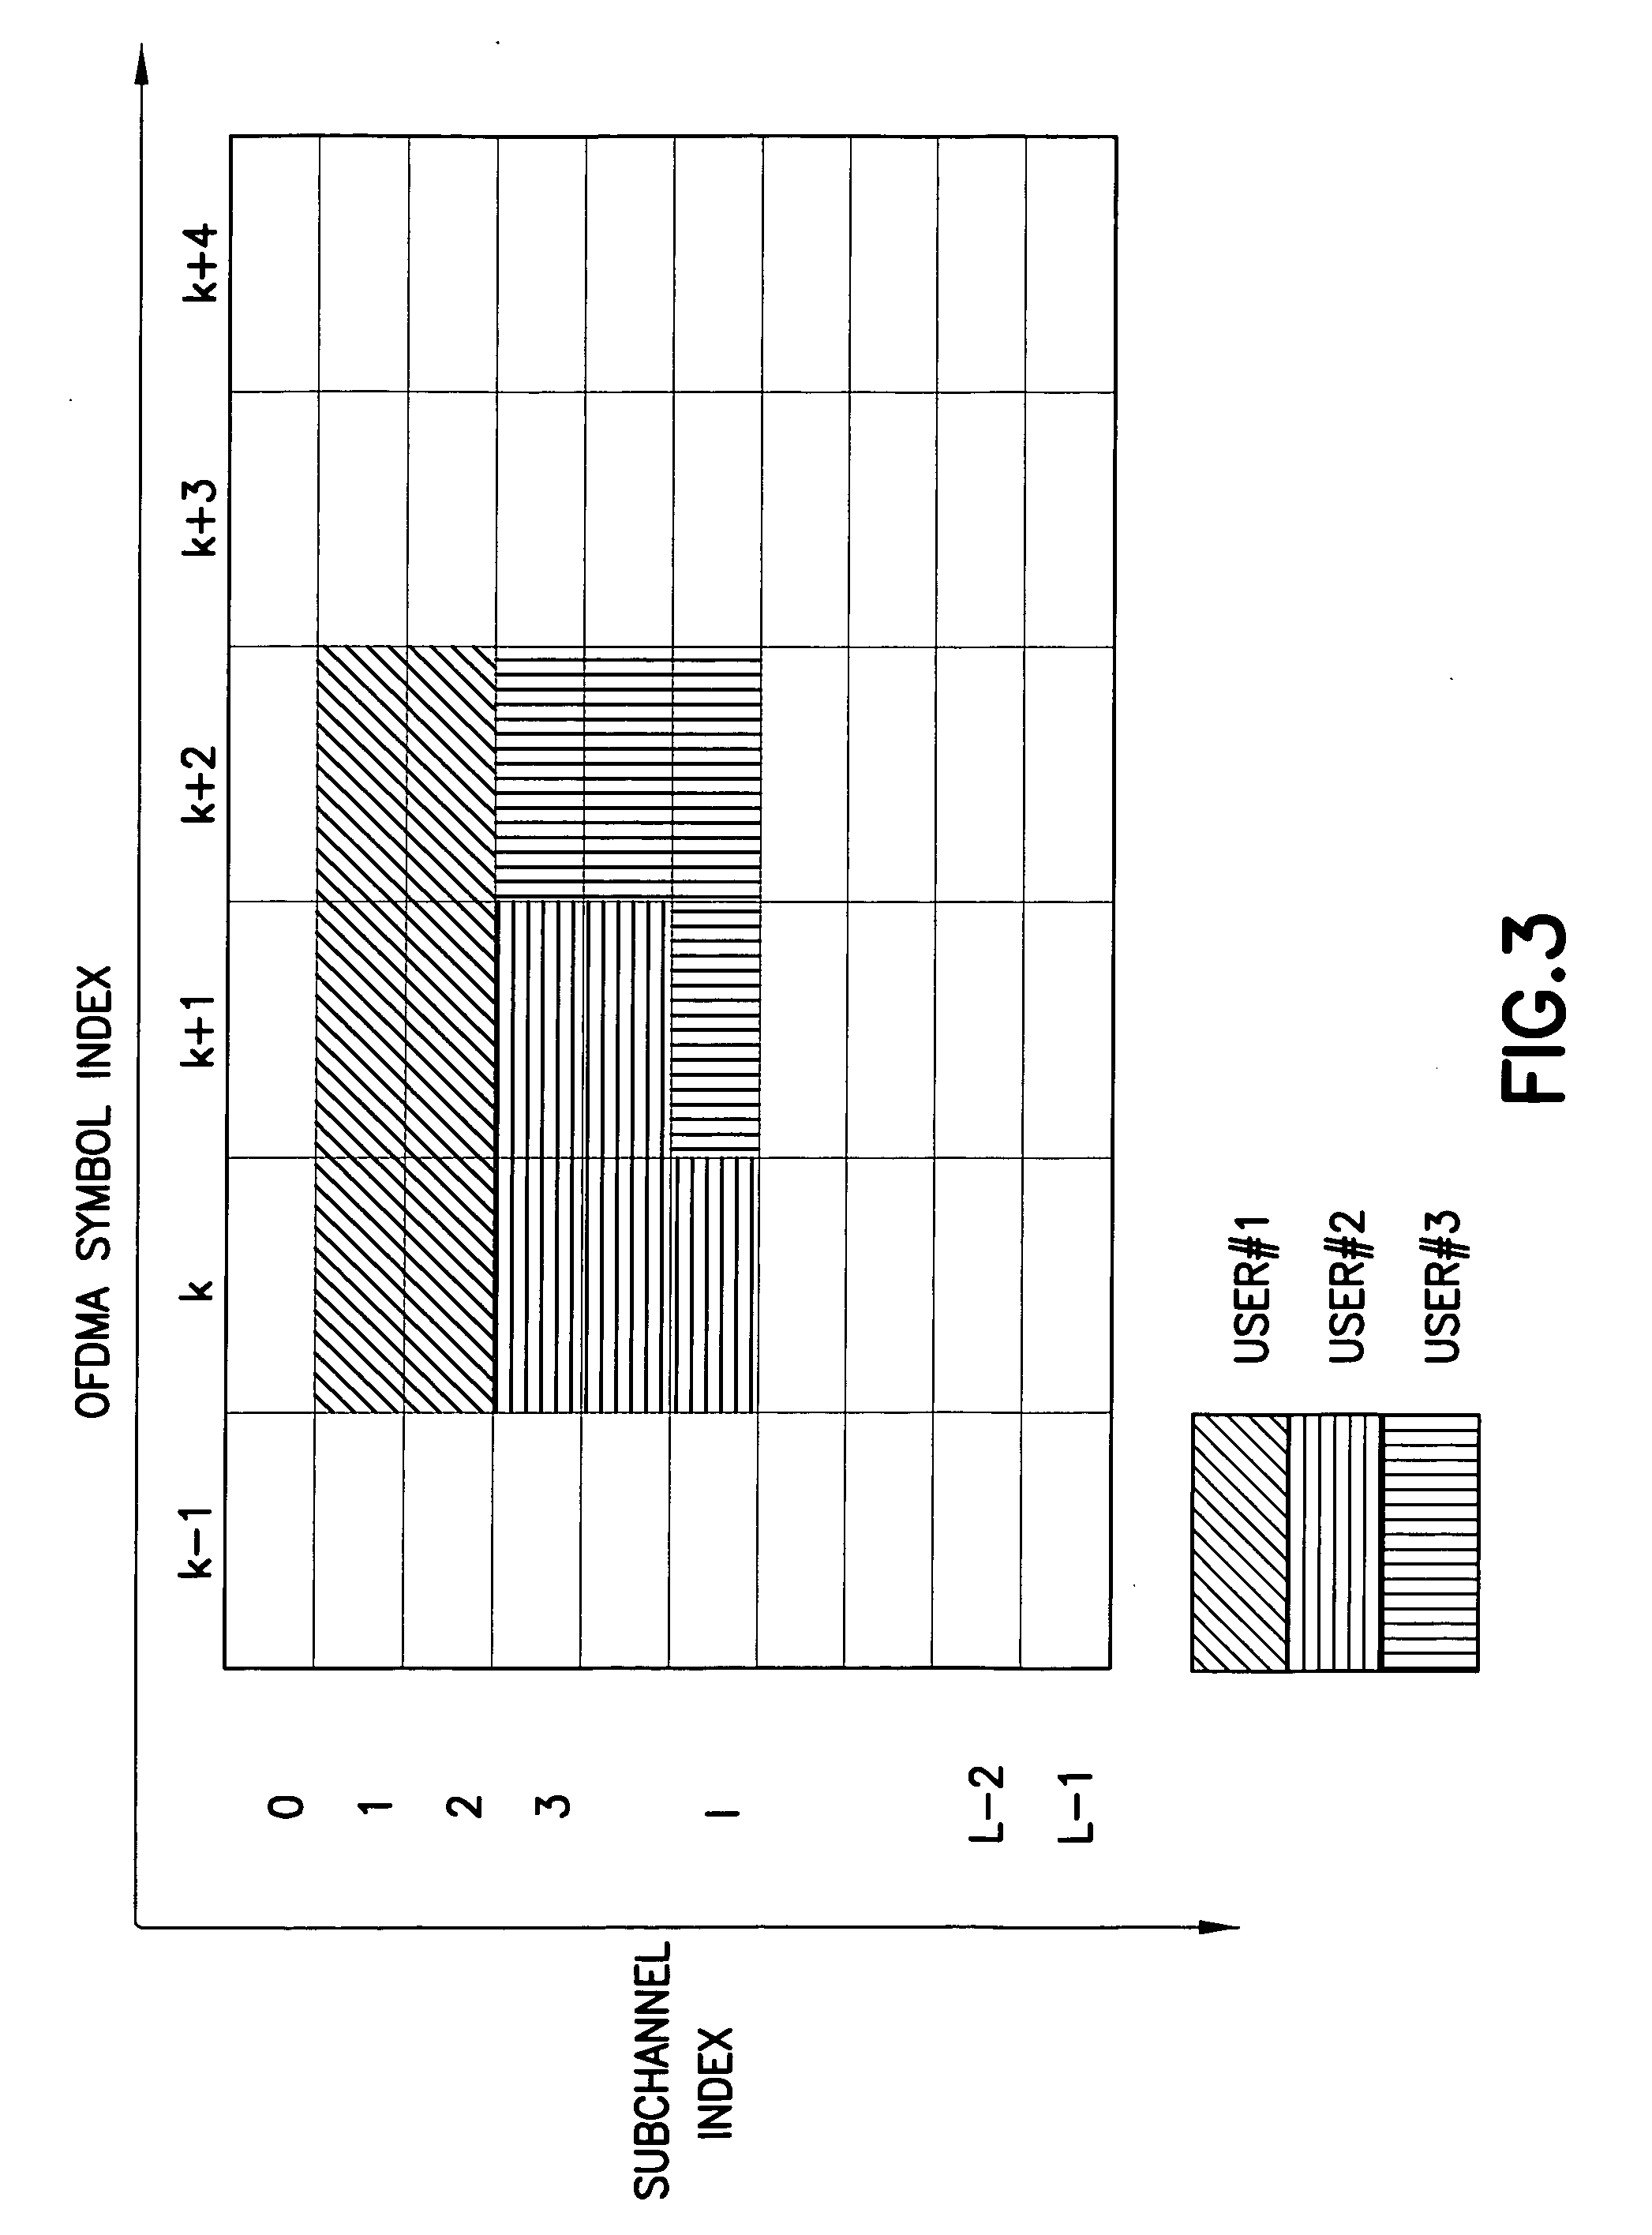 Method, apparatus and computer program product providing synchronization for OFDMA downlink signal